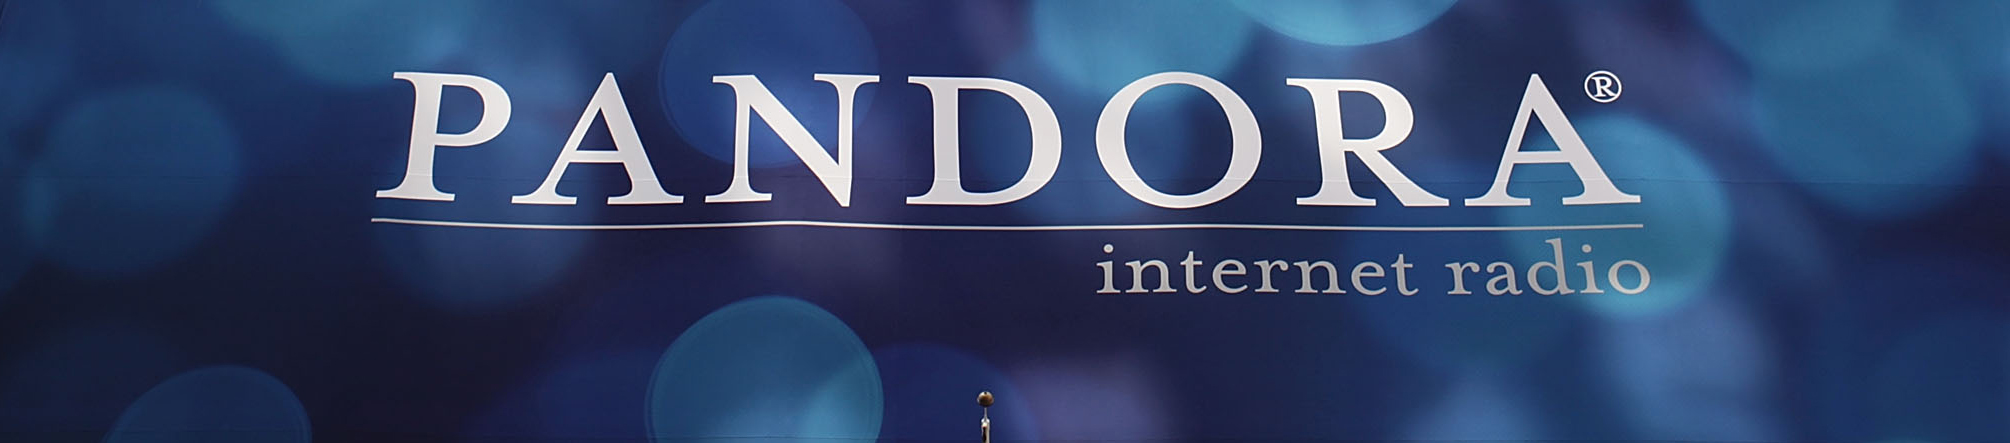 Pandora inks deal with world’s largest publisher